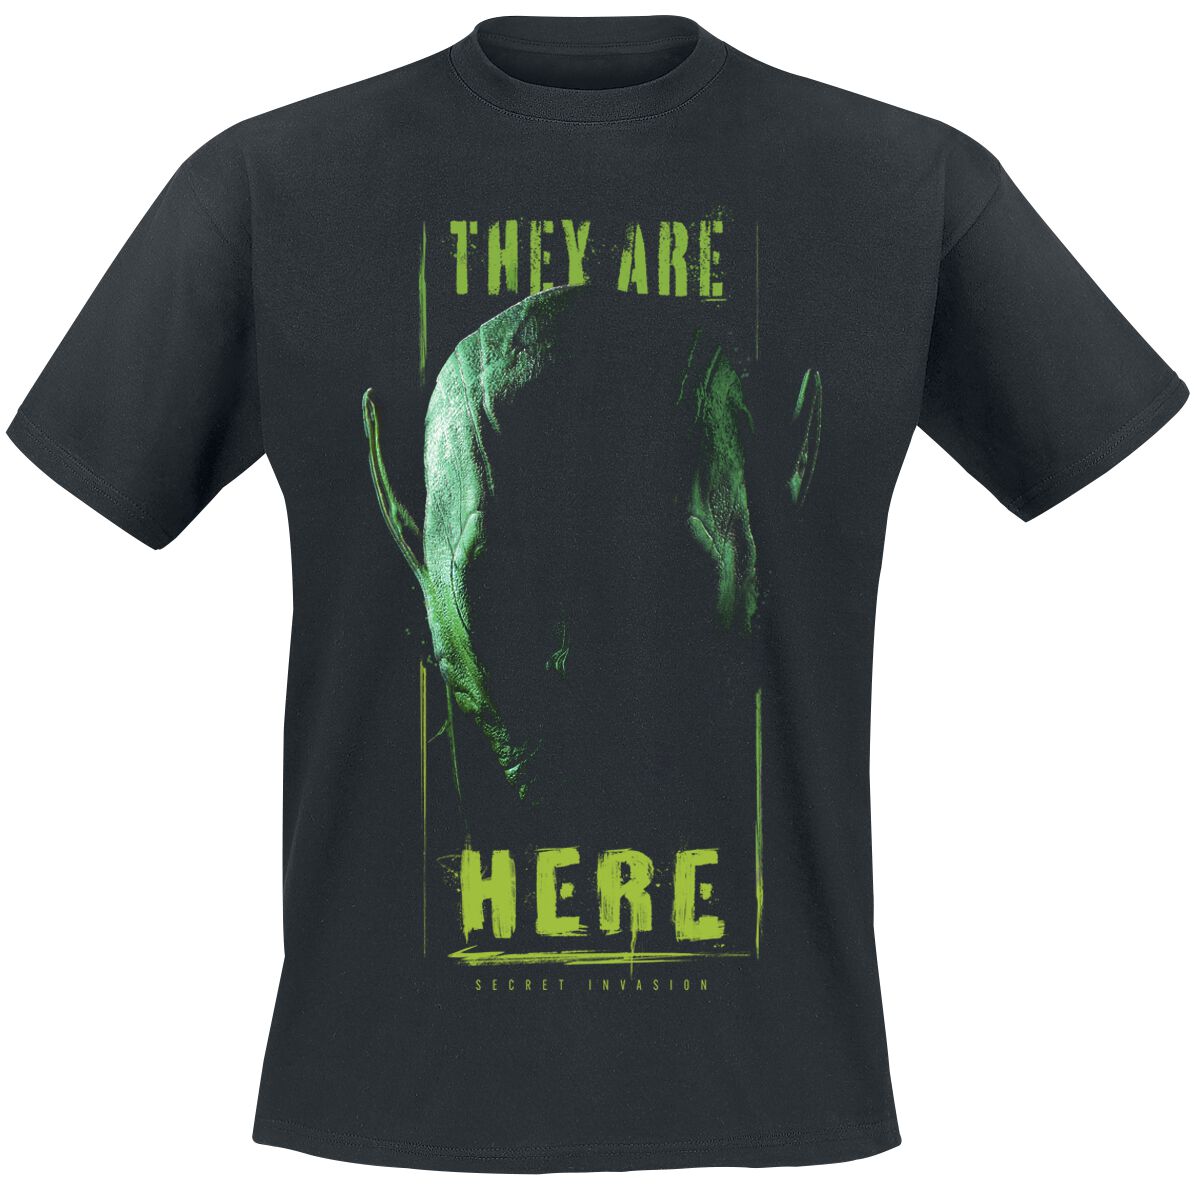 Secret Invasion They Are Here T-Shirt schwarz in M